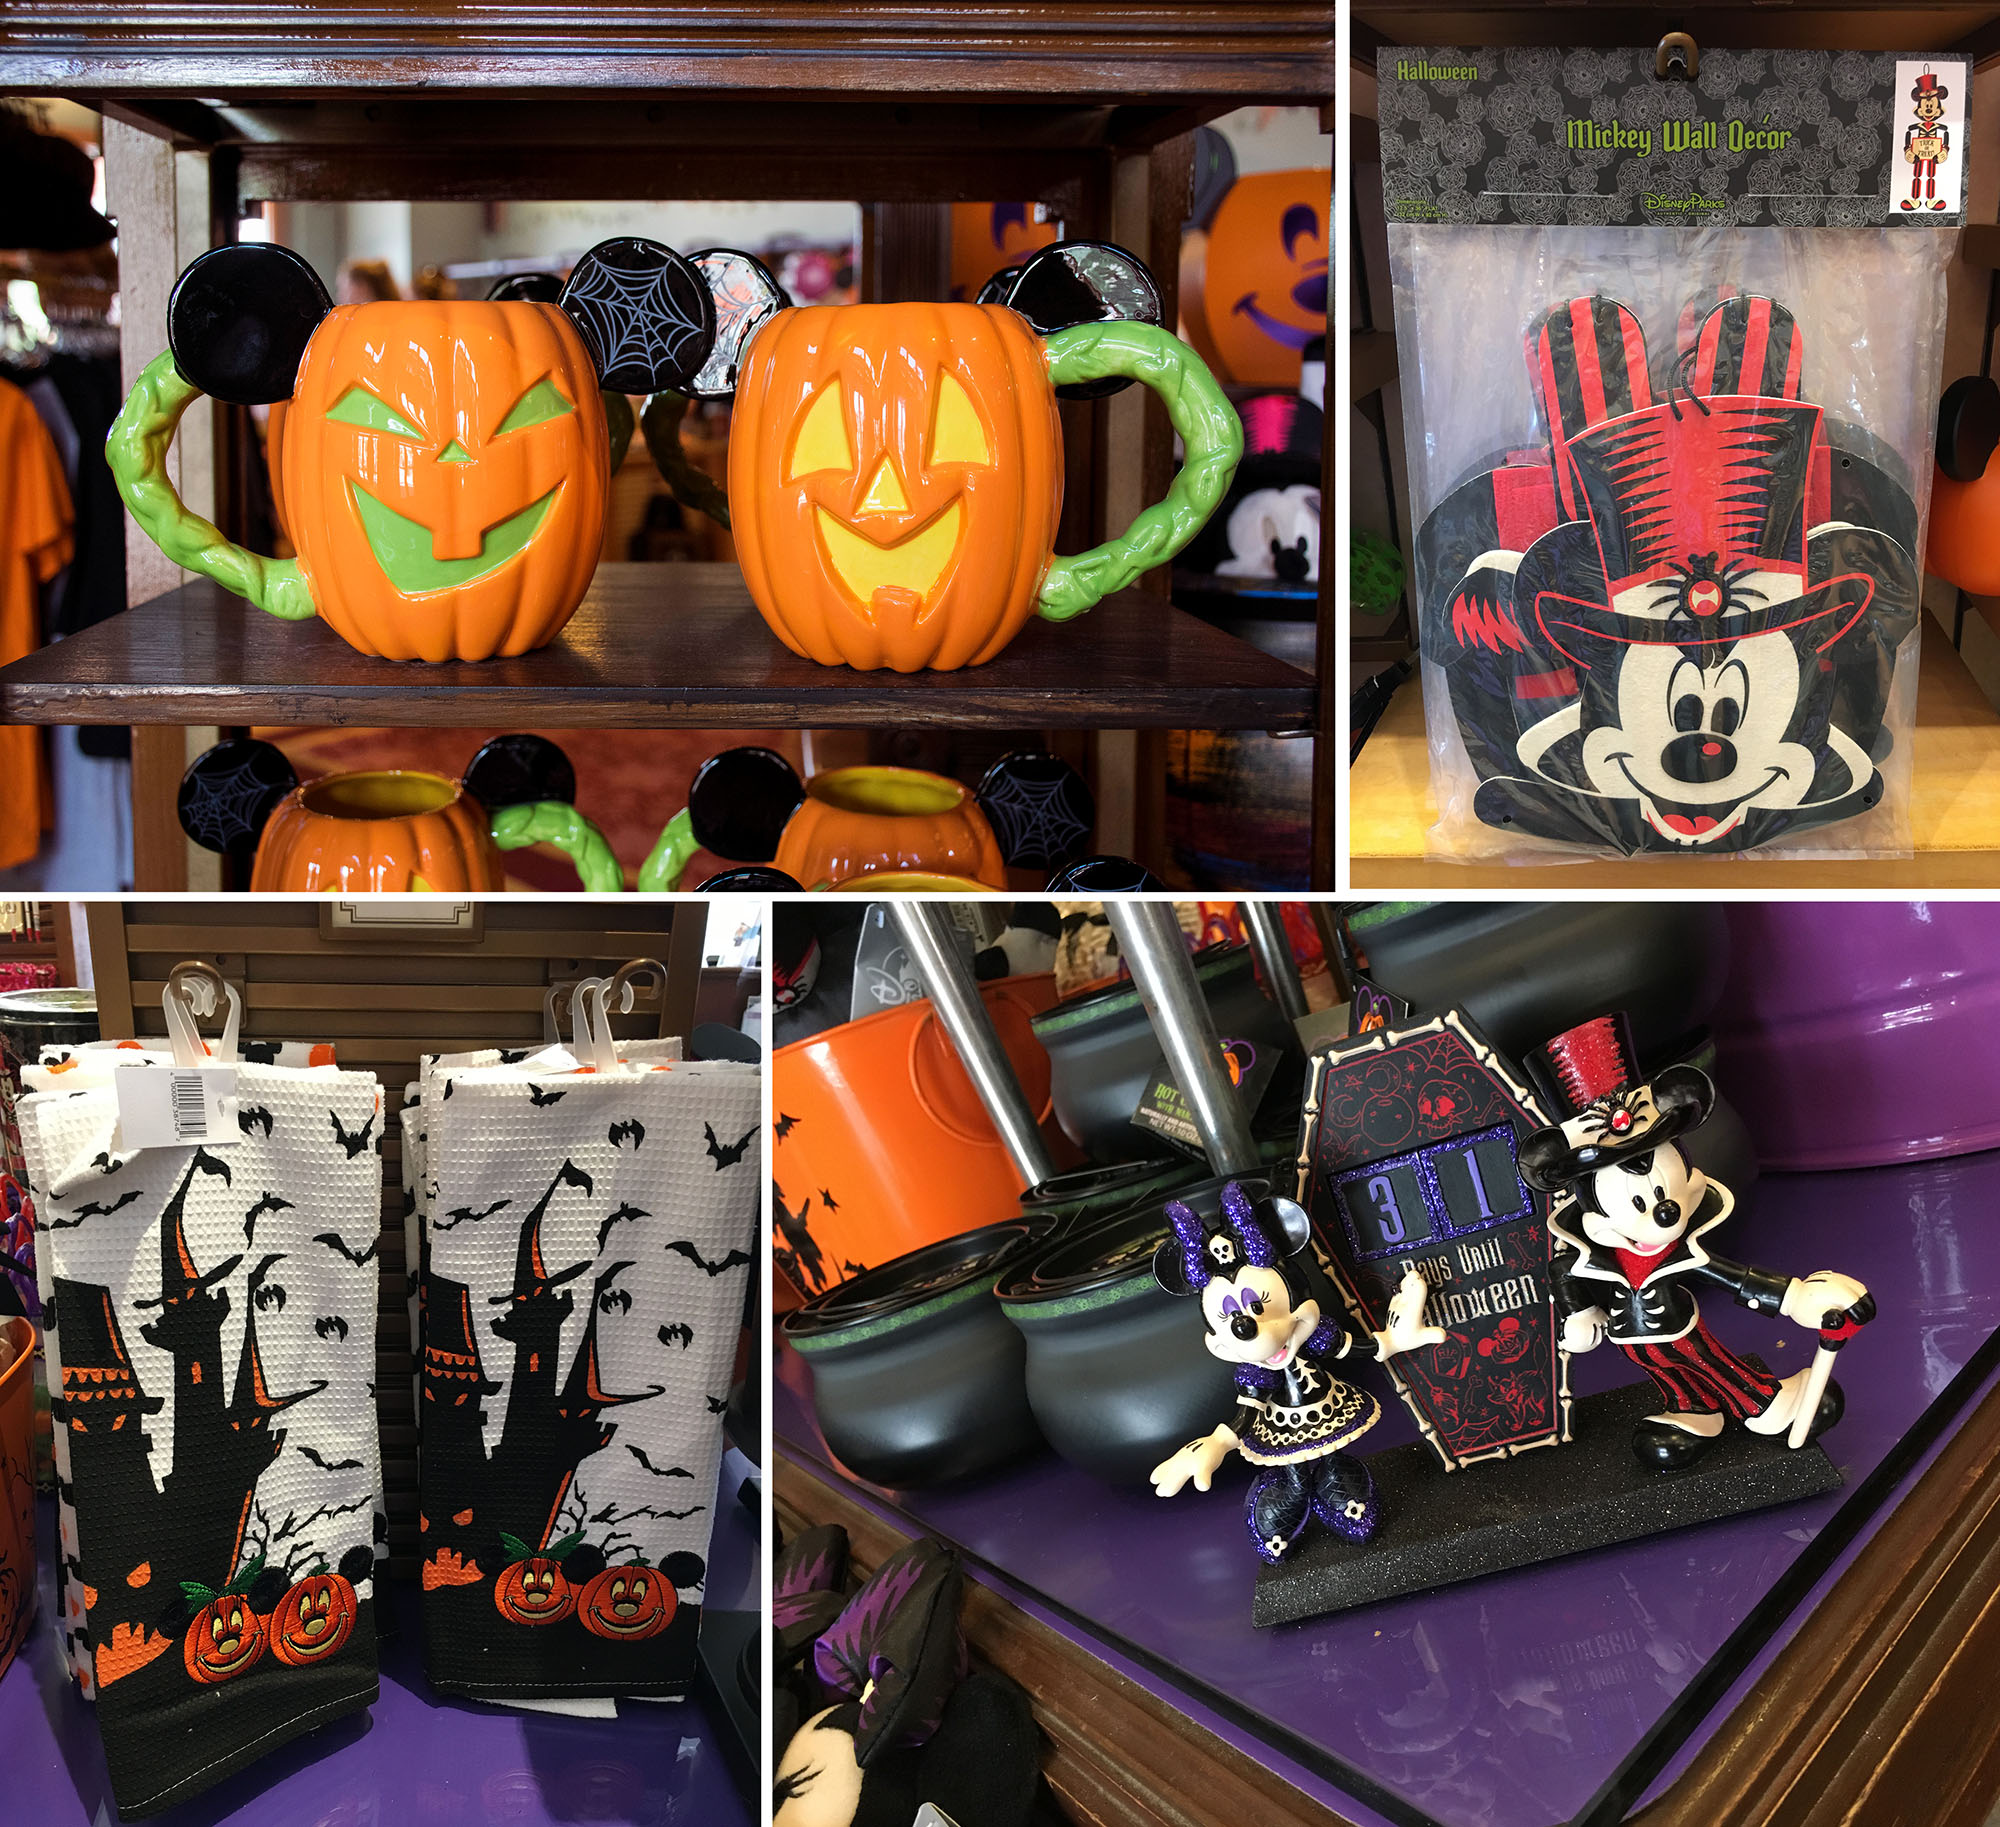 New Halloween Products